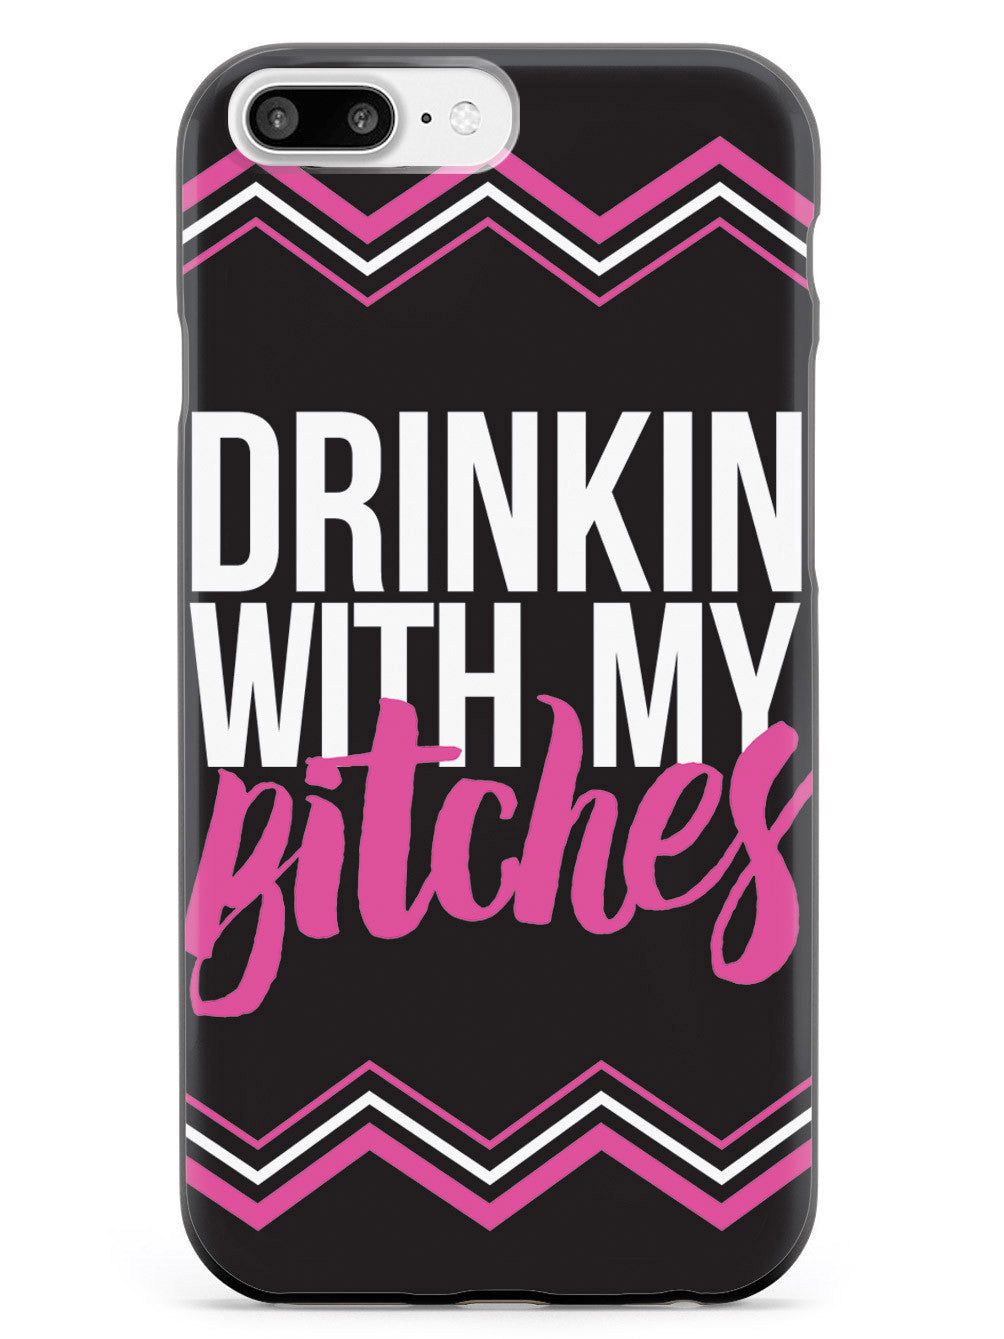 Drinkin' With My Bitches Case